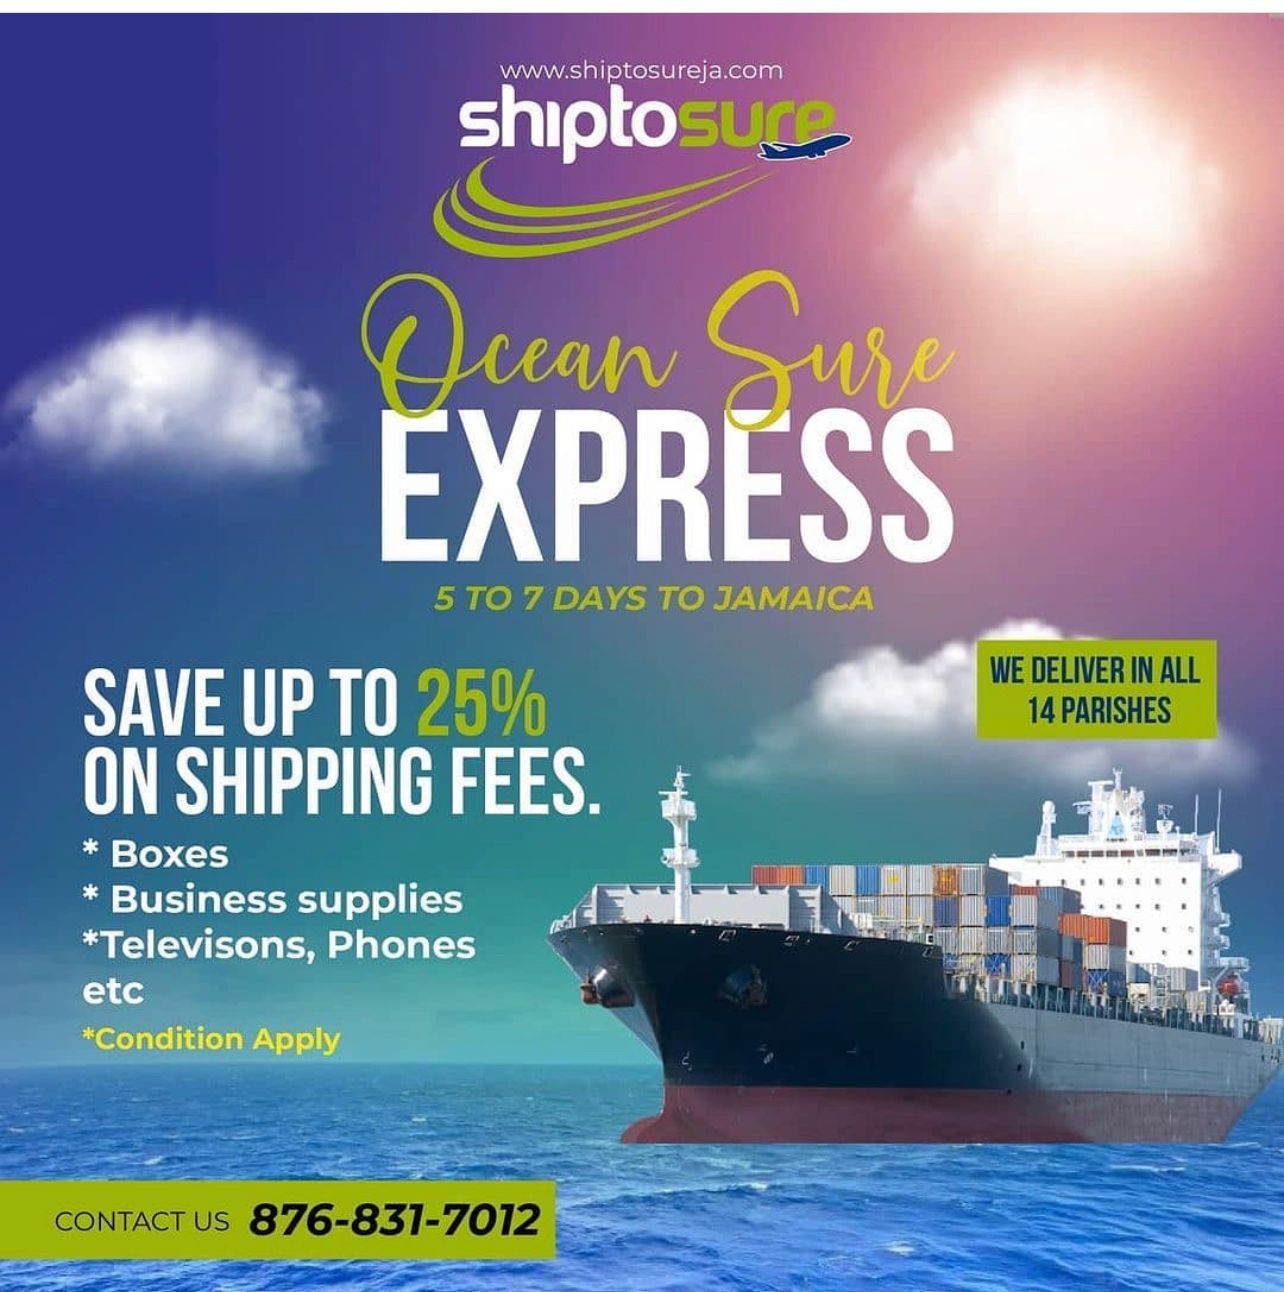 Ship to Sure Couriers and Freight - Shipping Agencies & Agents